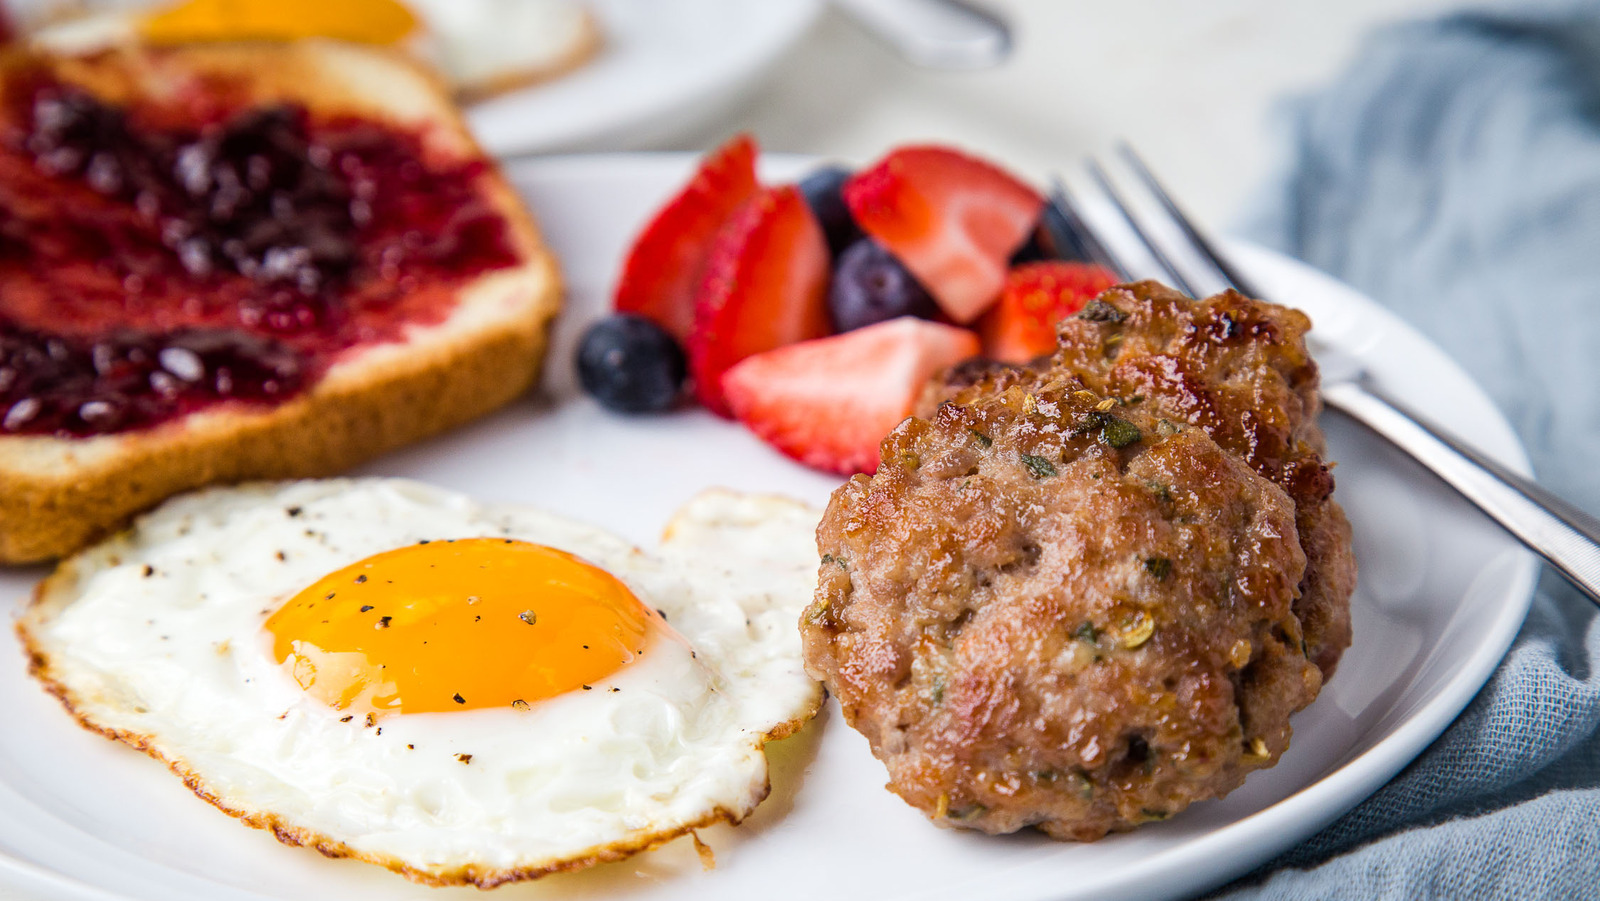 How Long Does Homemade Breakfast Sausage Last?